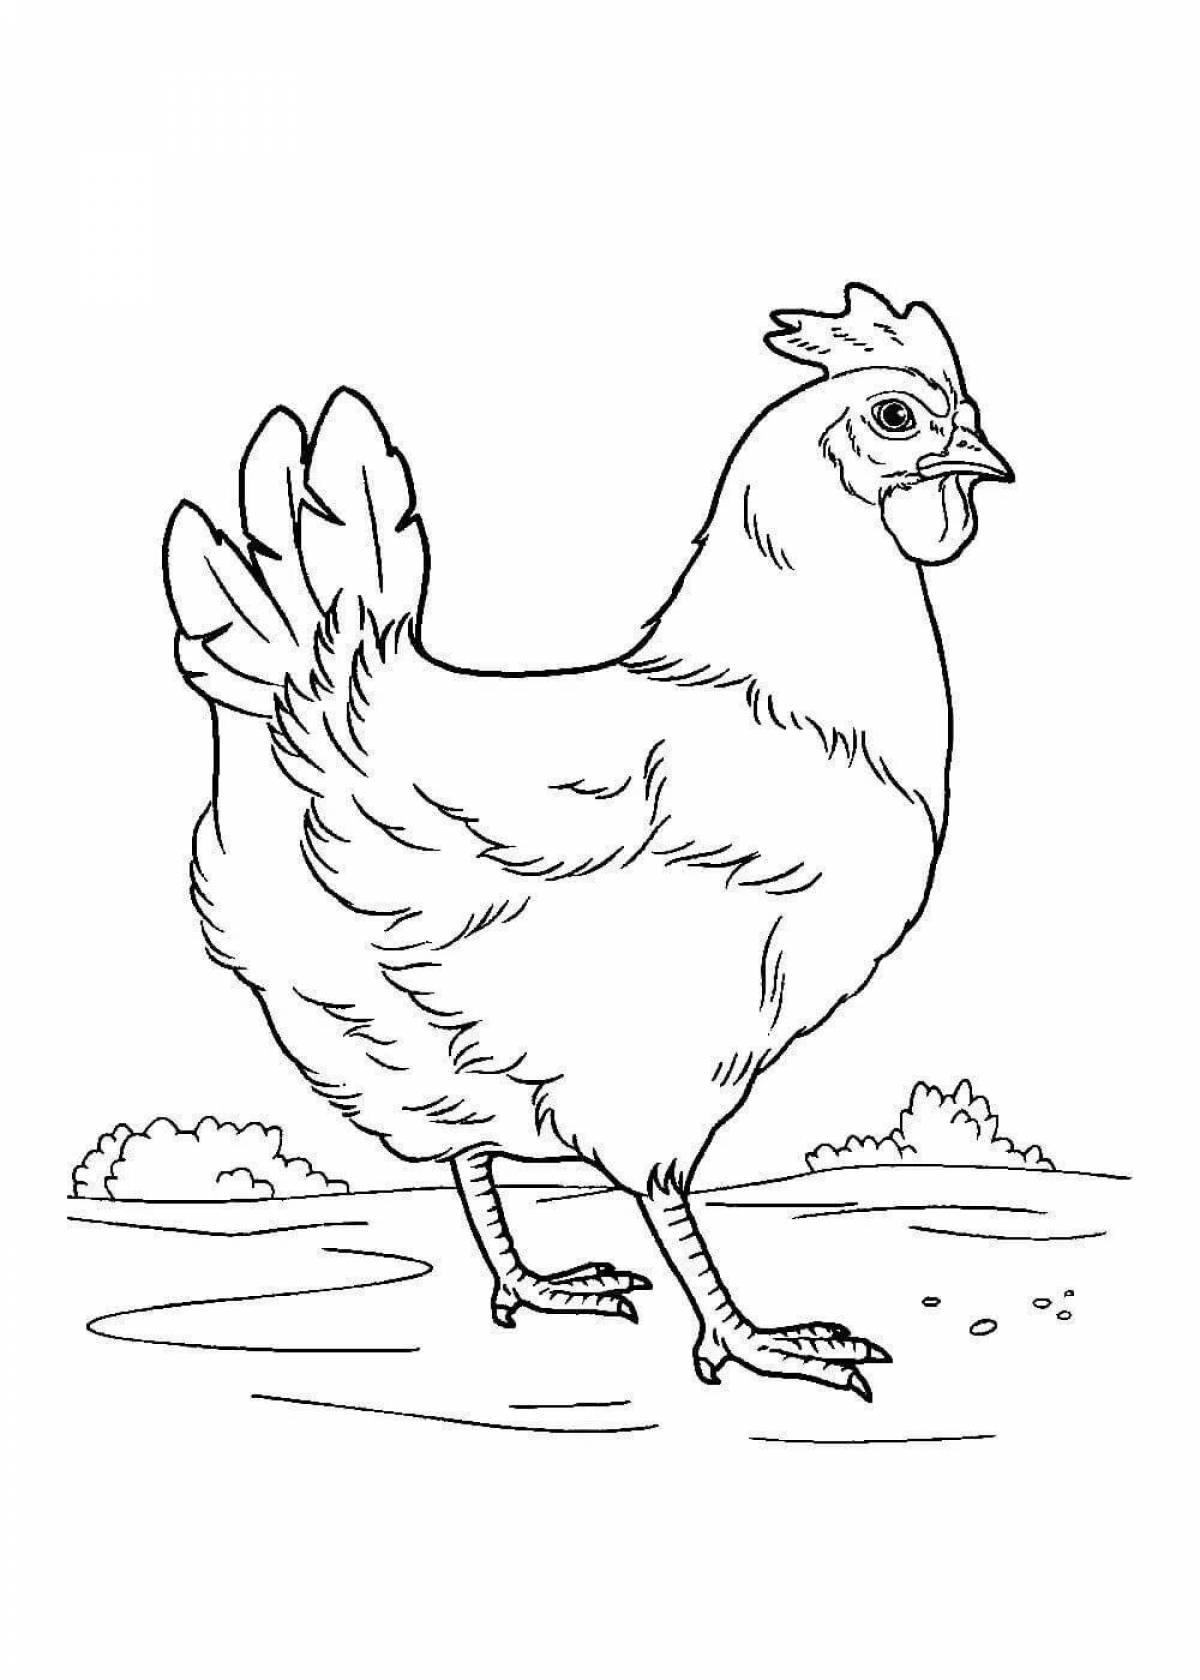 Coloring page feathered domestic animals and birds